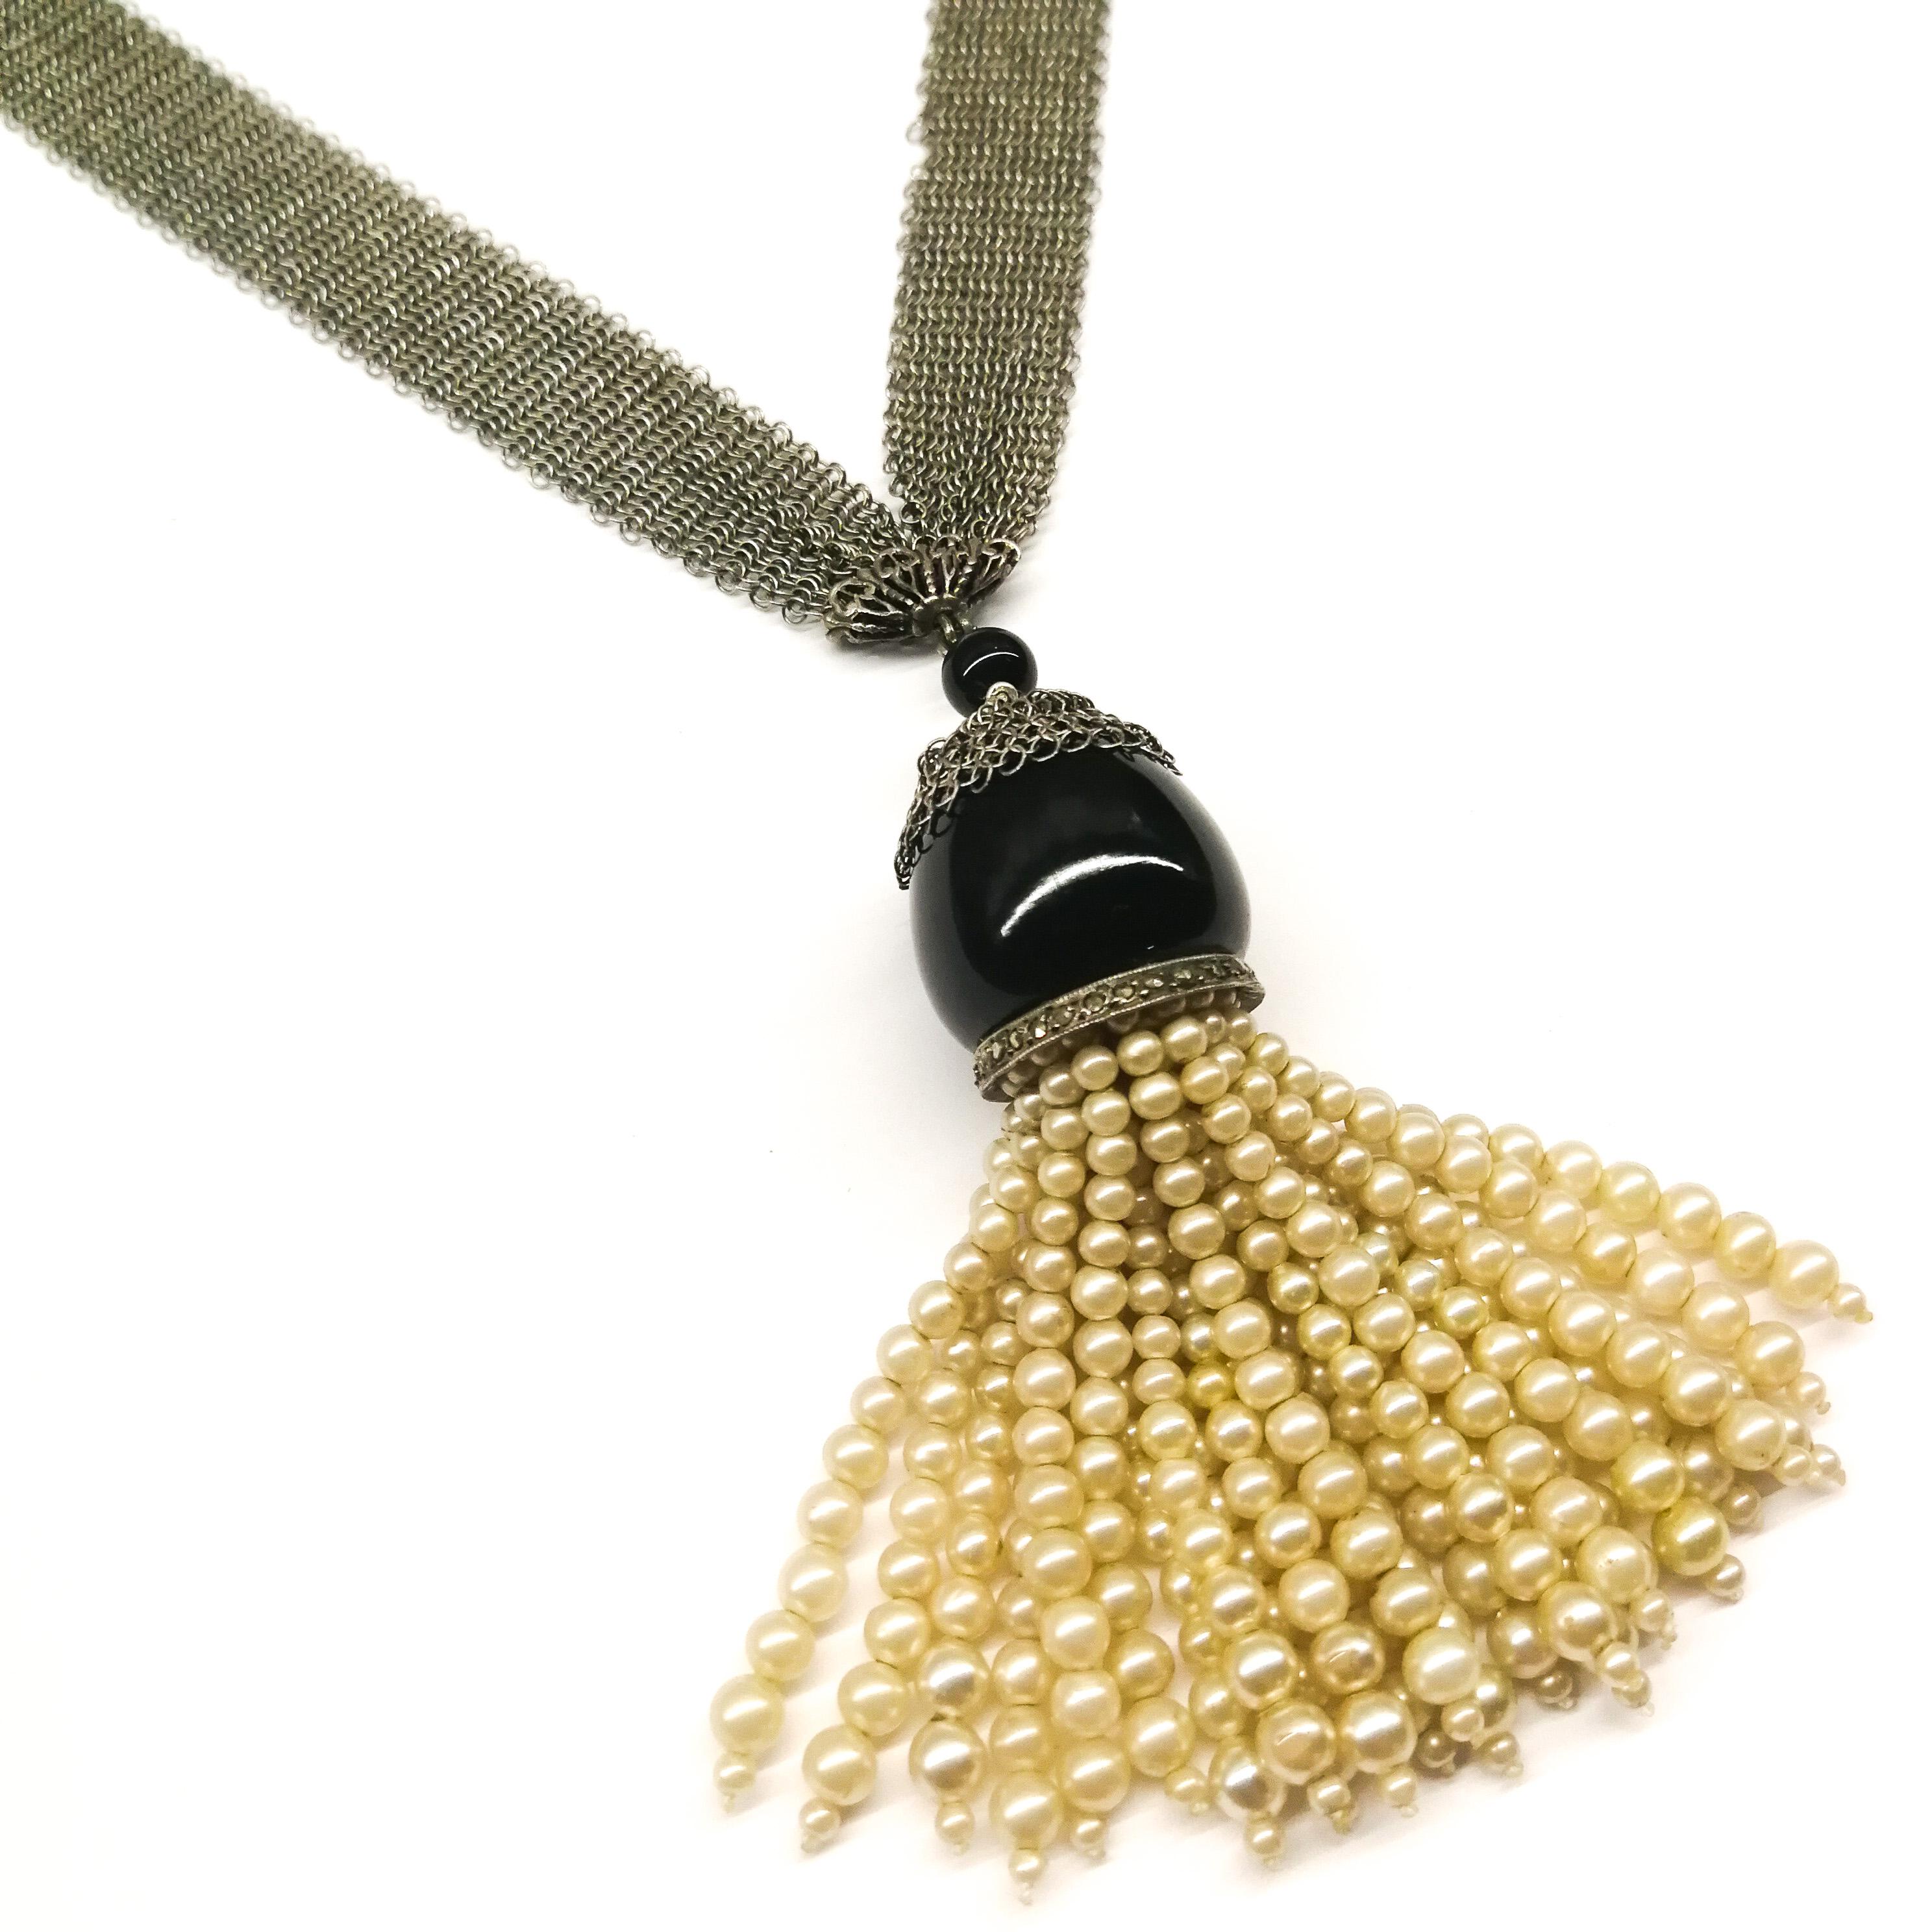 A charming sautoir, made from a delicate silver mesh chain - with a full tassel of cream colored paste pearls, onyx and marcasite, set in silver, suspended from the bottom of the chain. The mesh chain is very fine and fluid, with a small mesh 'cap'